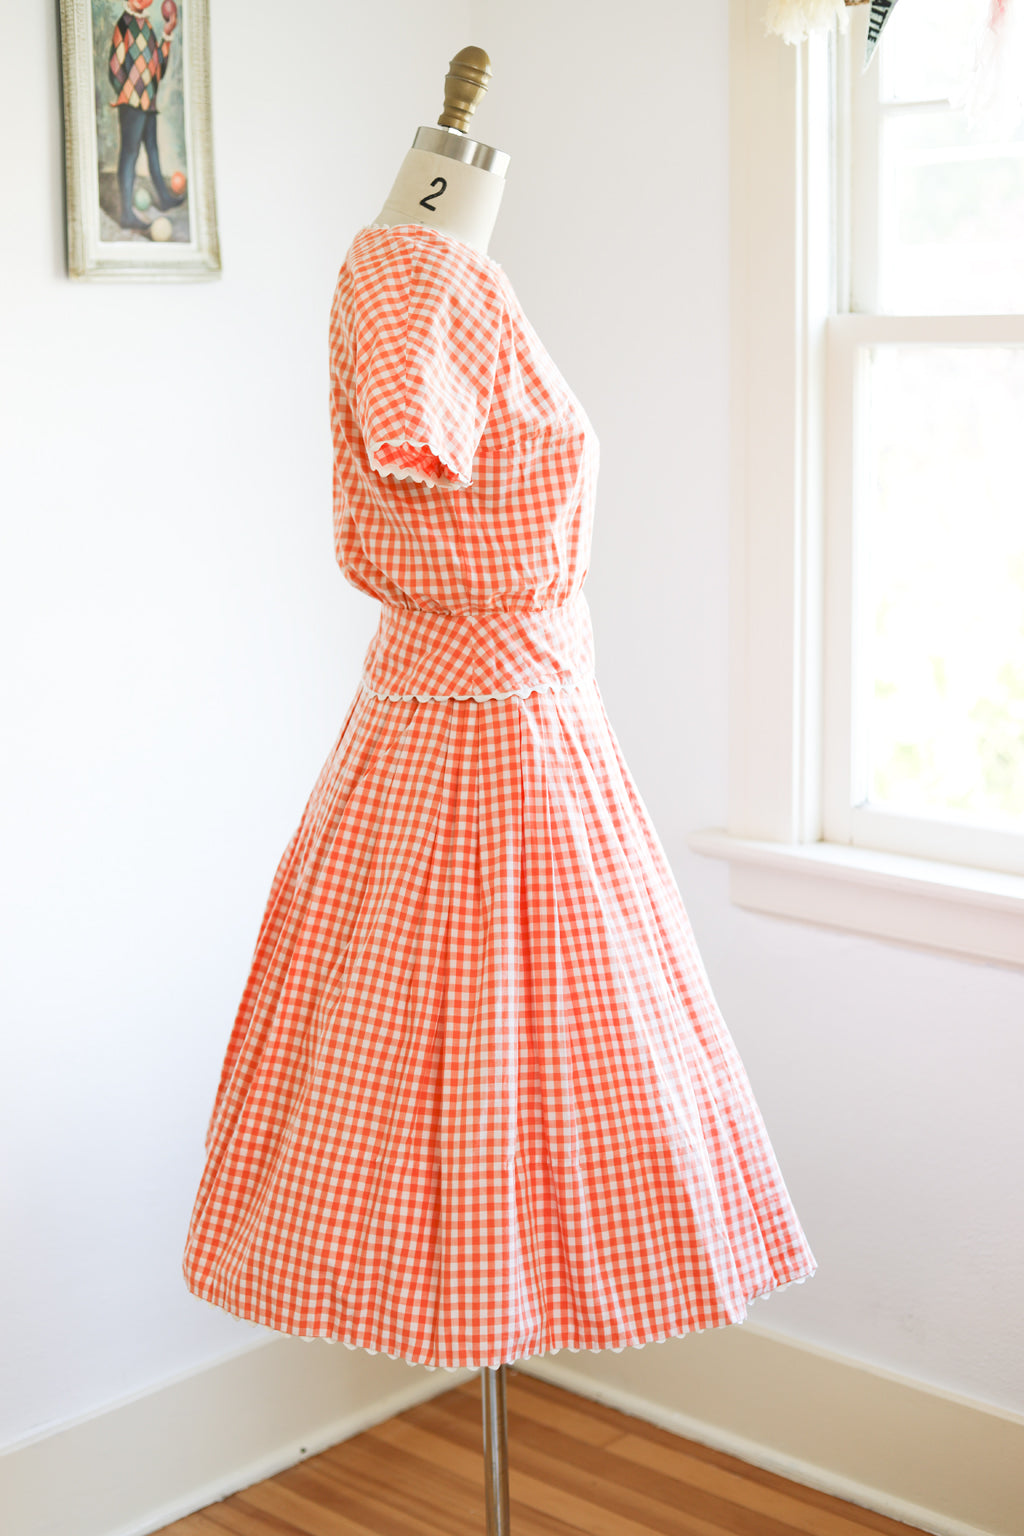 1950's Gingham Blouse and Skirt (Simplicity 1426) — Gwenstella Made